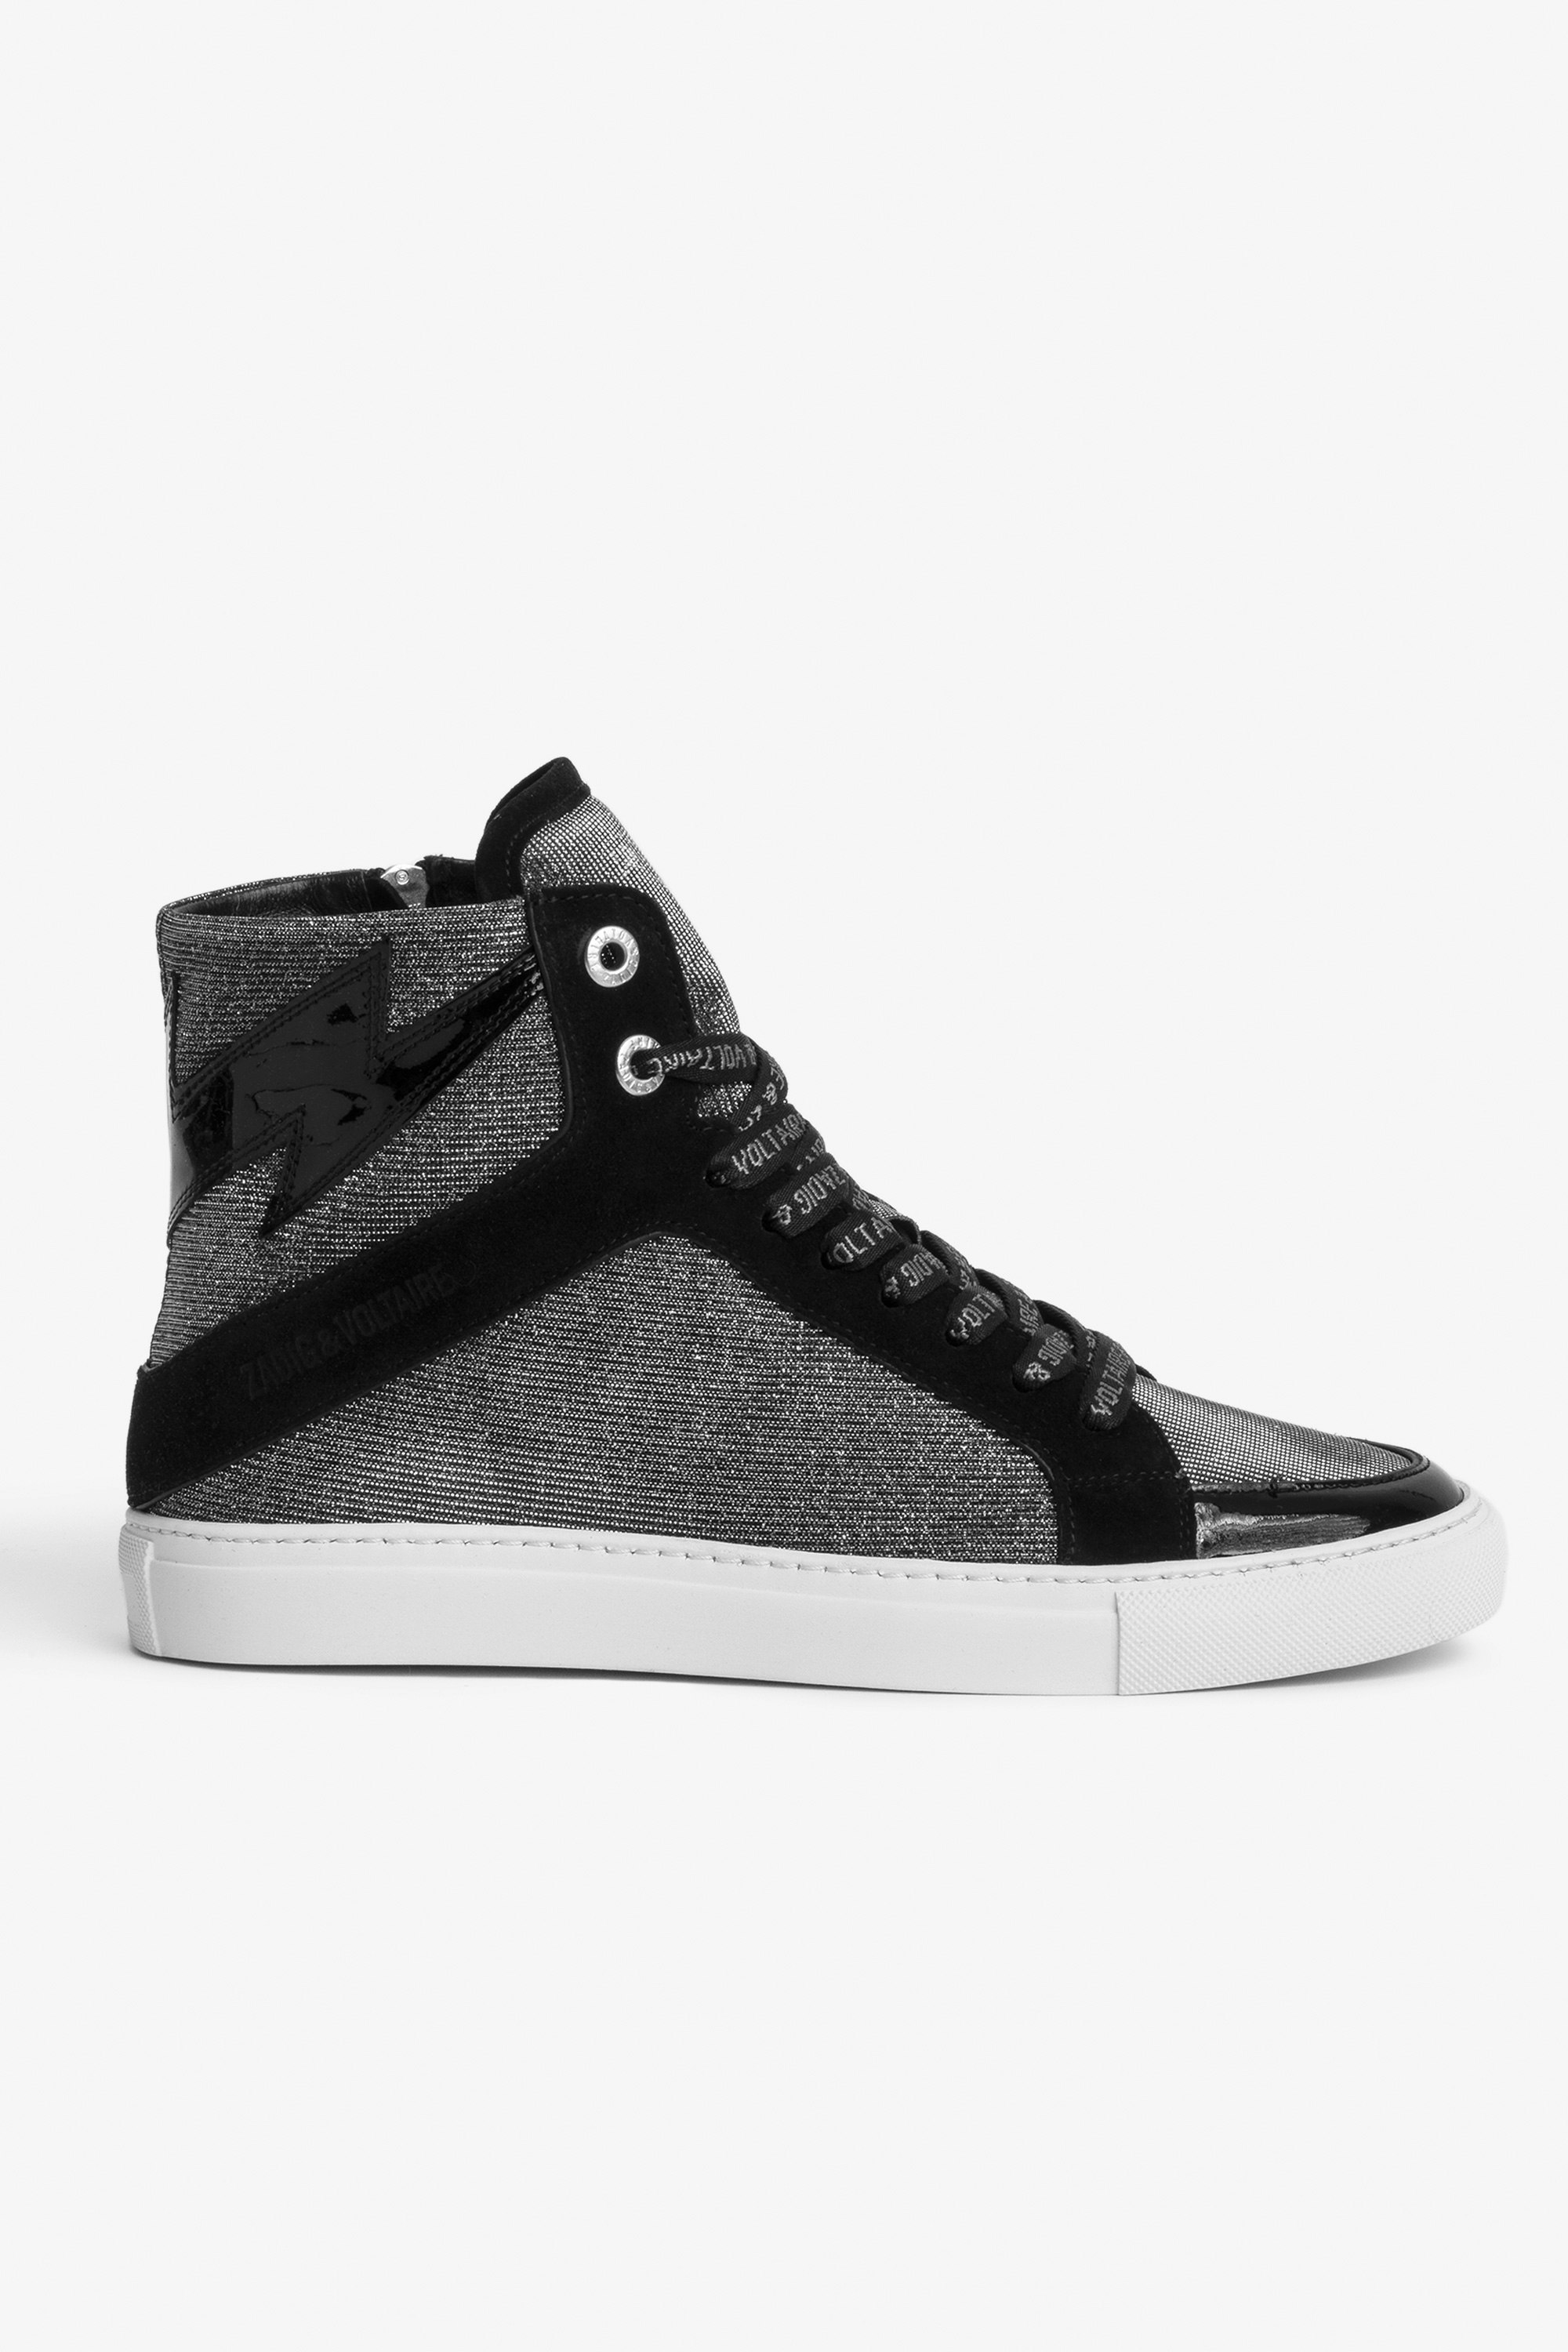 ZV1747 High Flash Sneakers Women’s black leather and silver glitter high-top sneakers with lightning bolt patch